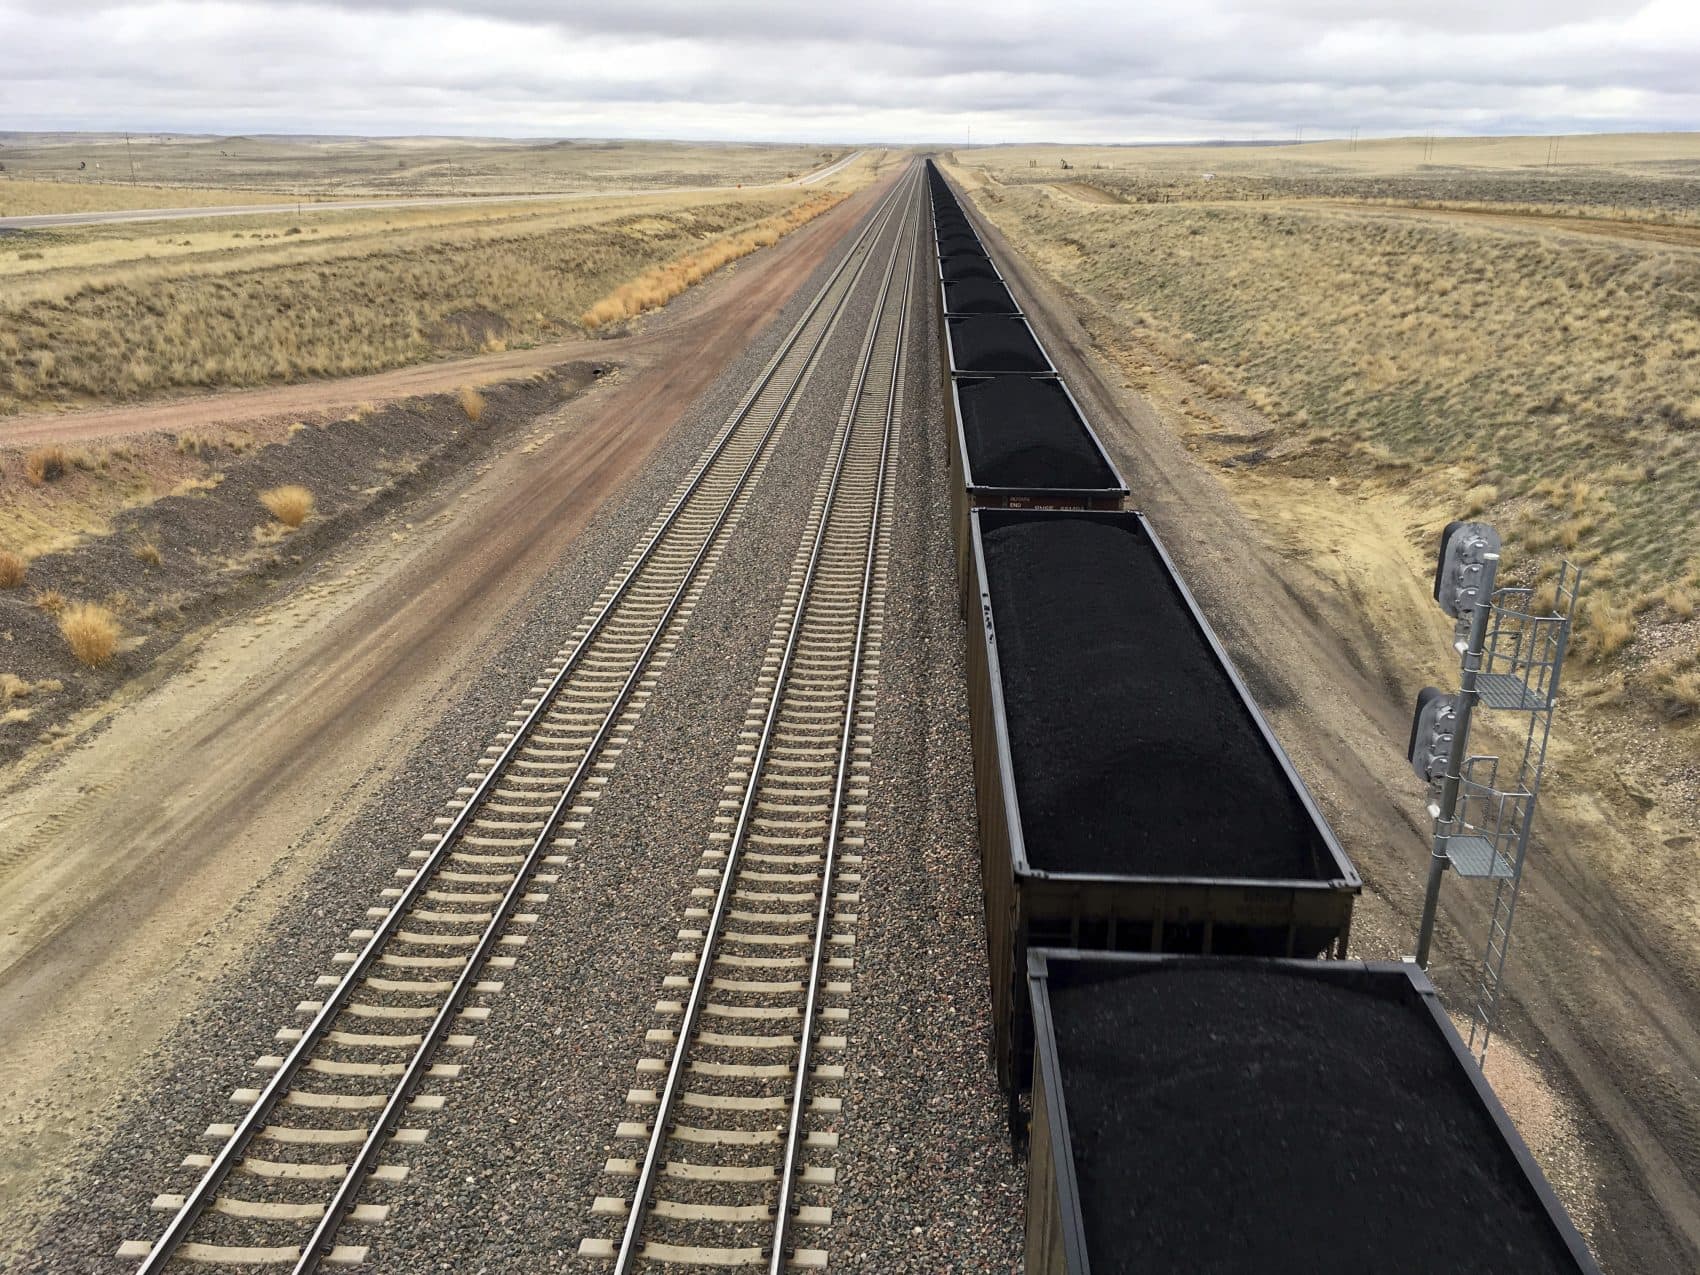 A train near hauls coal mined from Wyoming's Powder River Basin near Bill, Wyo., Tuesday, March 28, 2017. President Donald Trump's lifting of a federal coal leasing moratorium issued last year by President Barack Obama will allow new leasing of federal coal to resume in the basin and elsewhere. (Mead Gruver/AP)